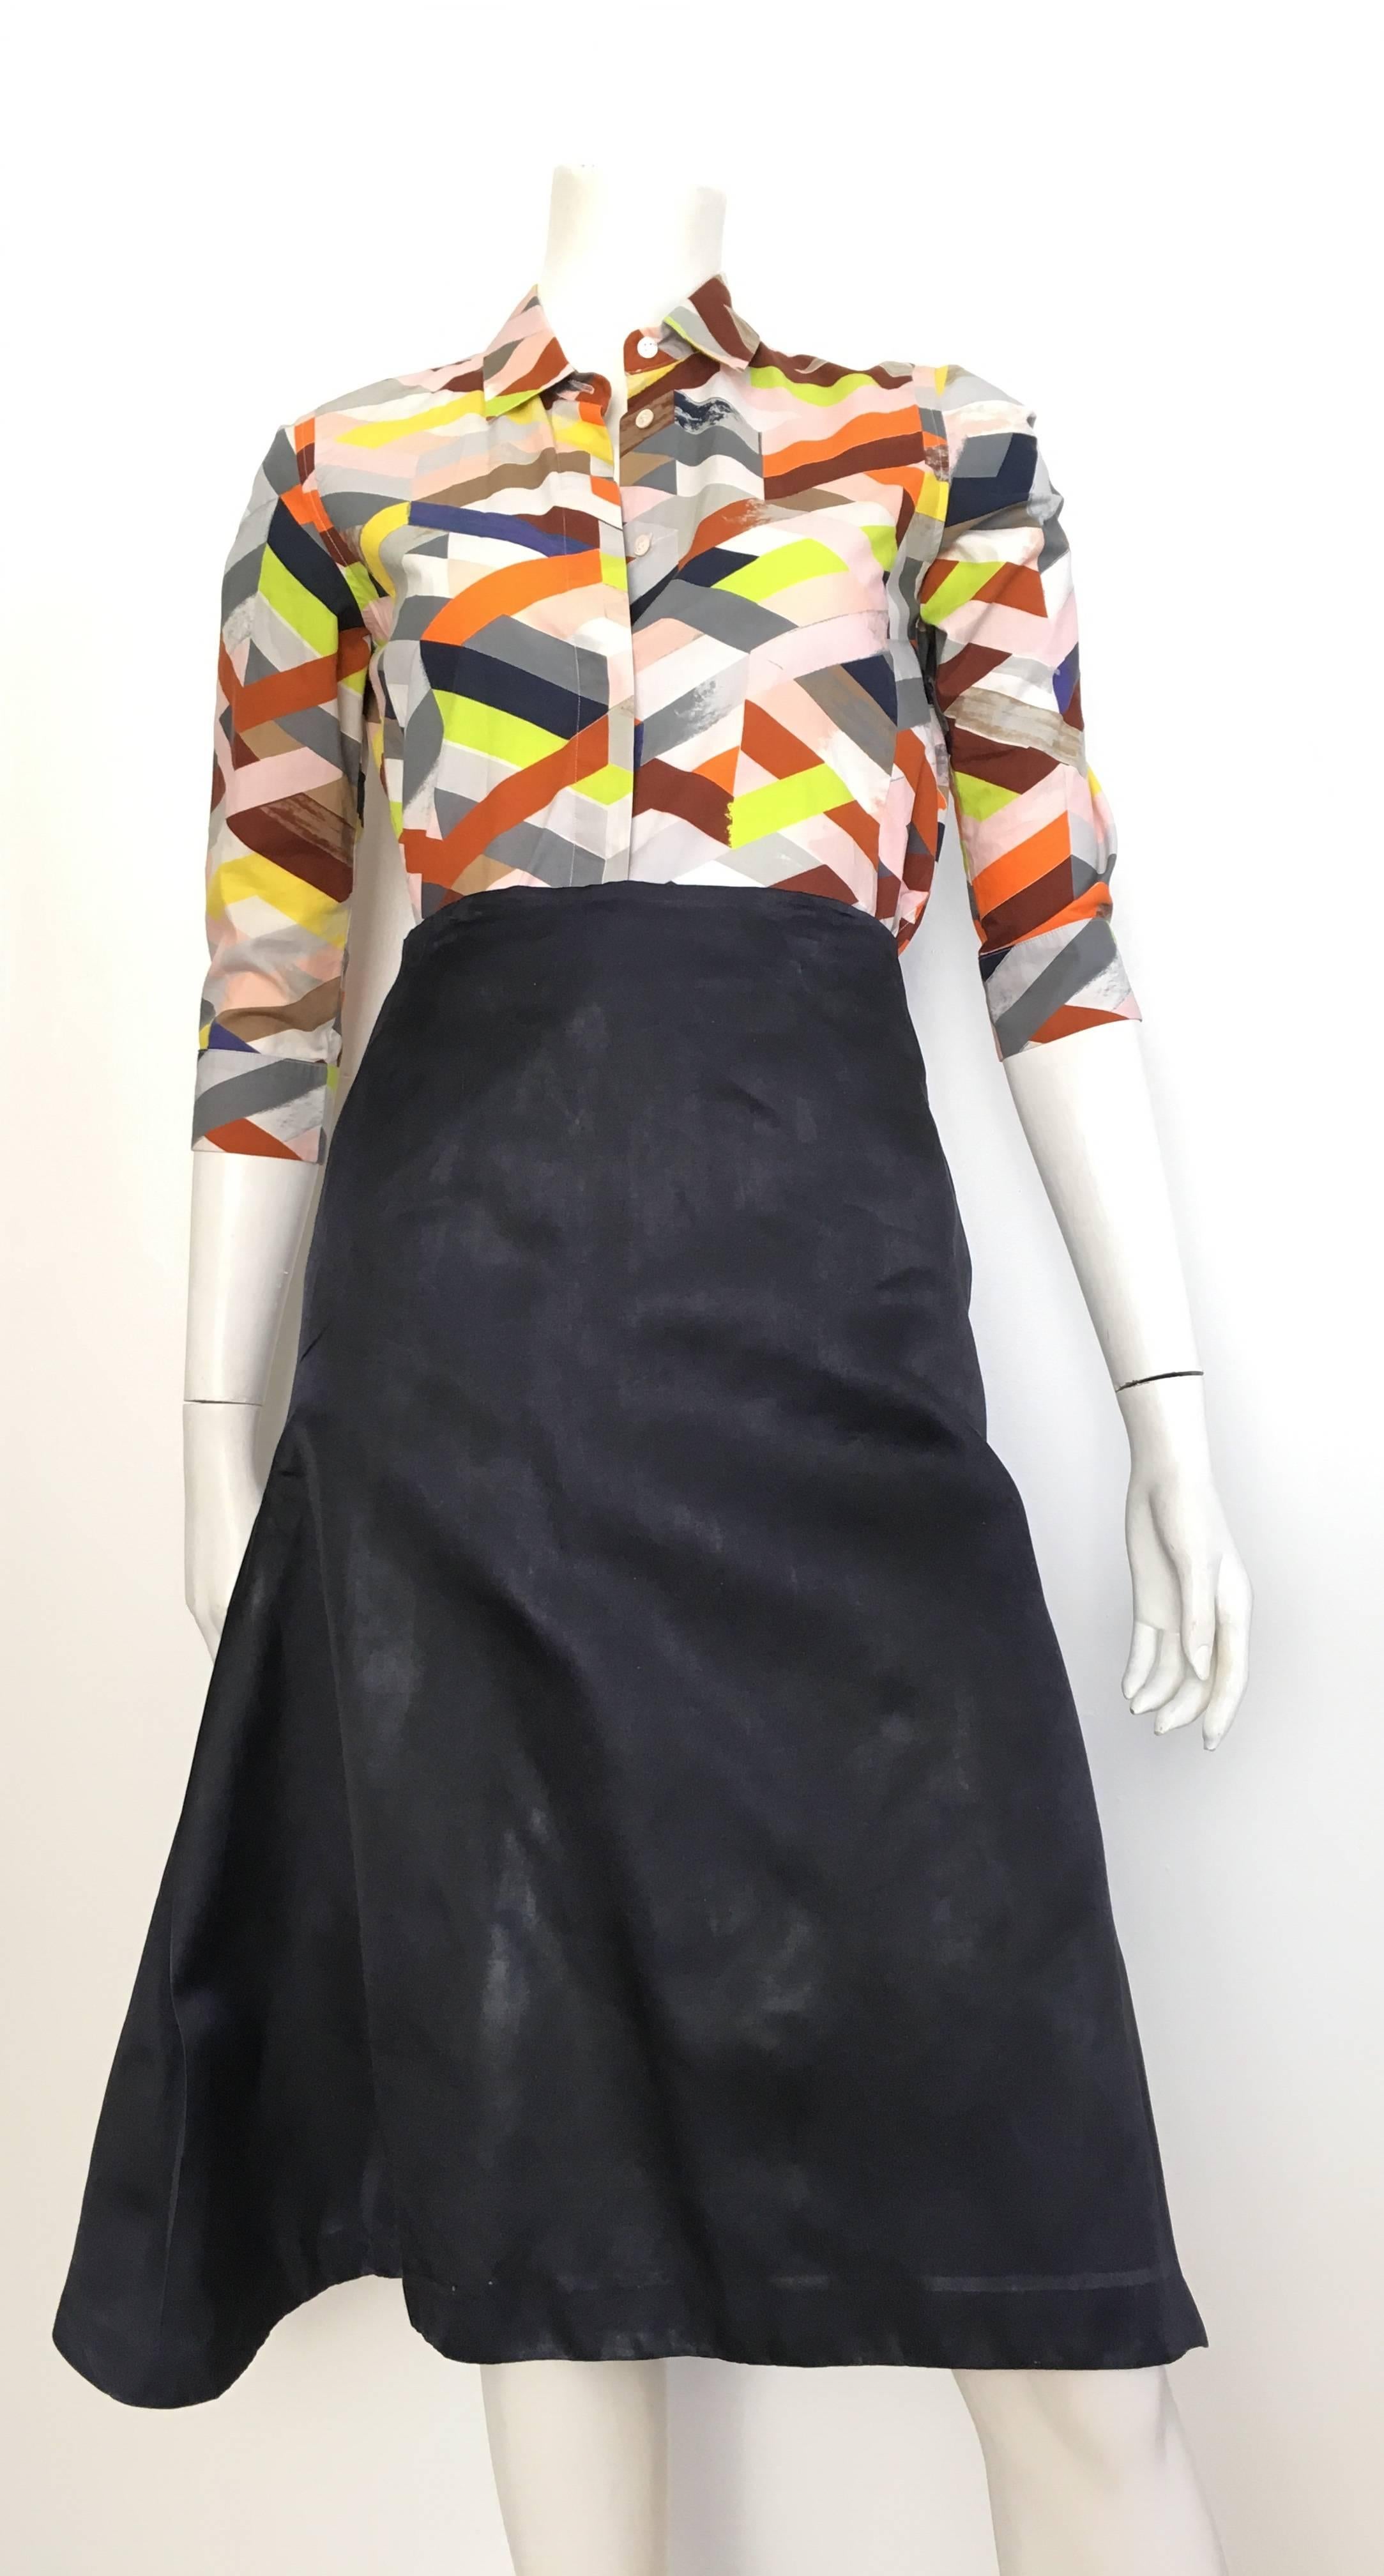 Pringle of Scotland cotton abstract print button up blouse with 3/4 sleeves is a size 4.  Made in Italy. Colorful & whimsical cotton blouse looks amazing worn with your denim jeans, skirt or pants. This blouse fits Matilda the Mannequin, who is